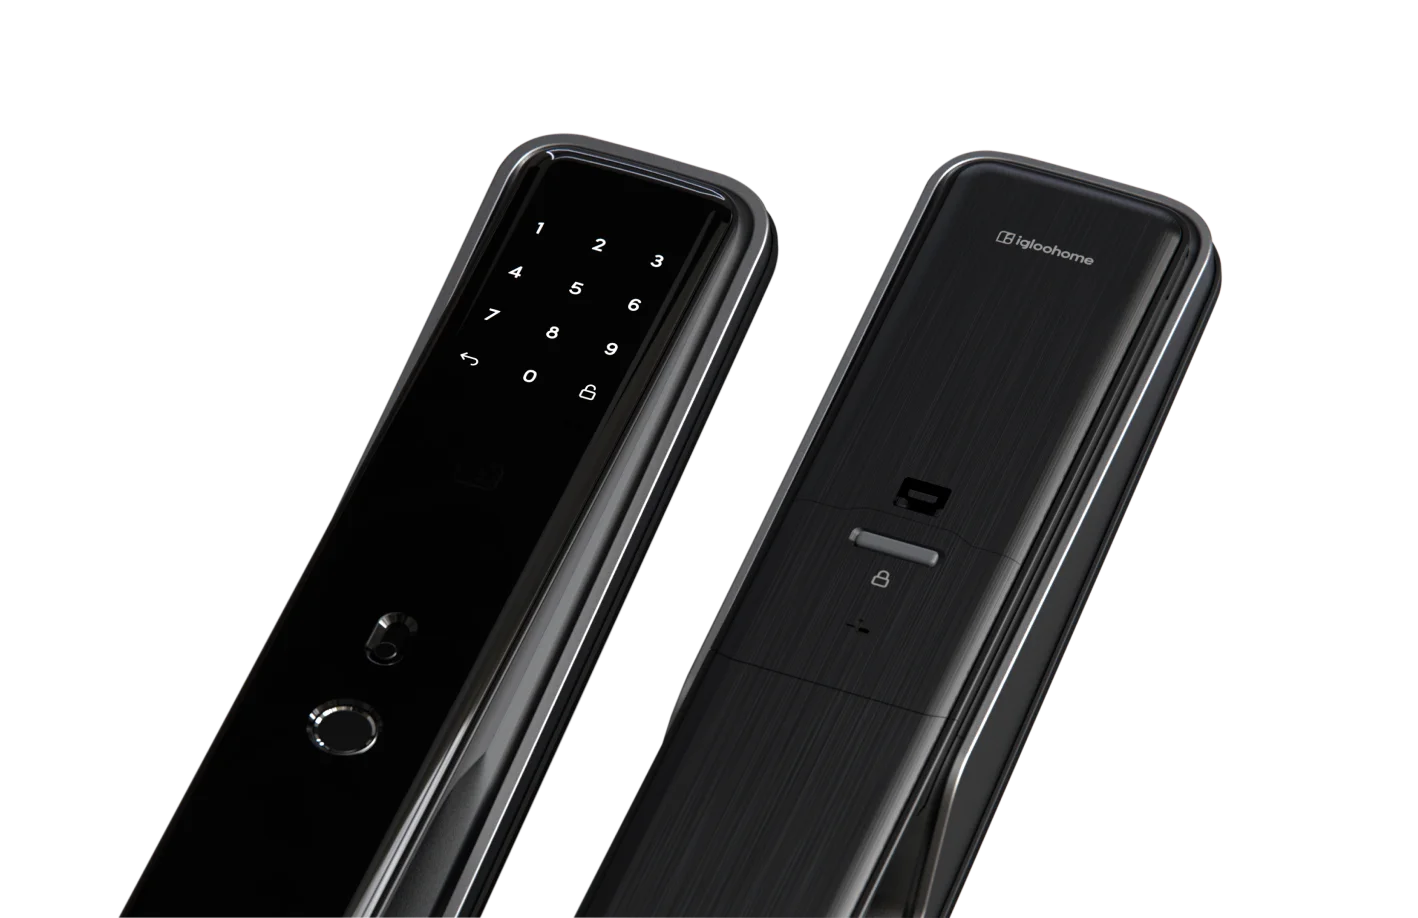 igloohome Mortise Touch smart lock